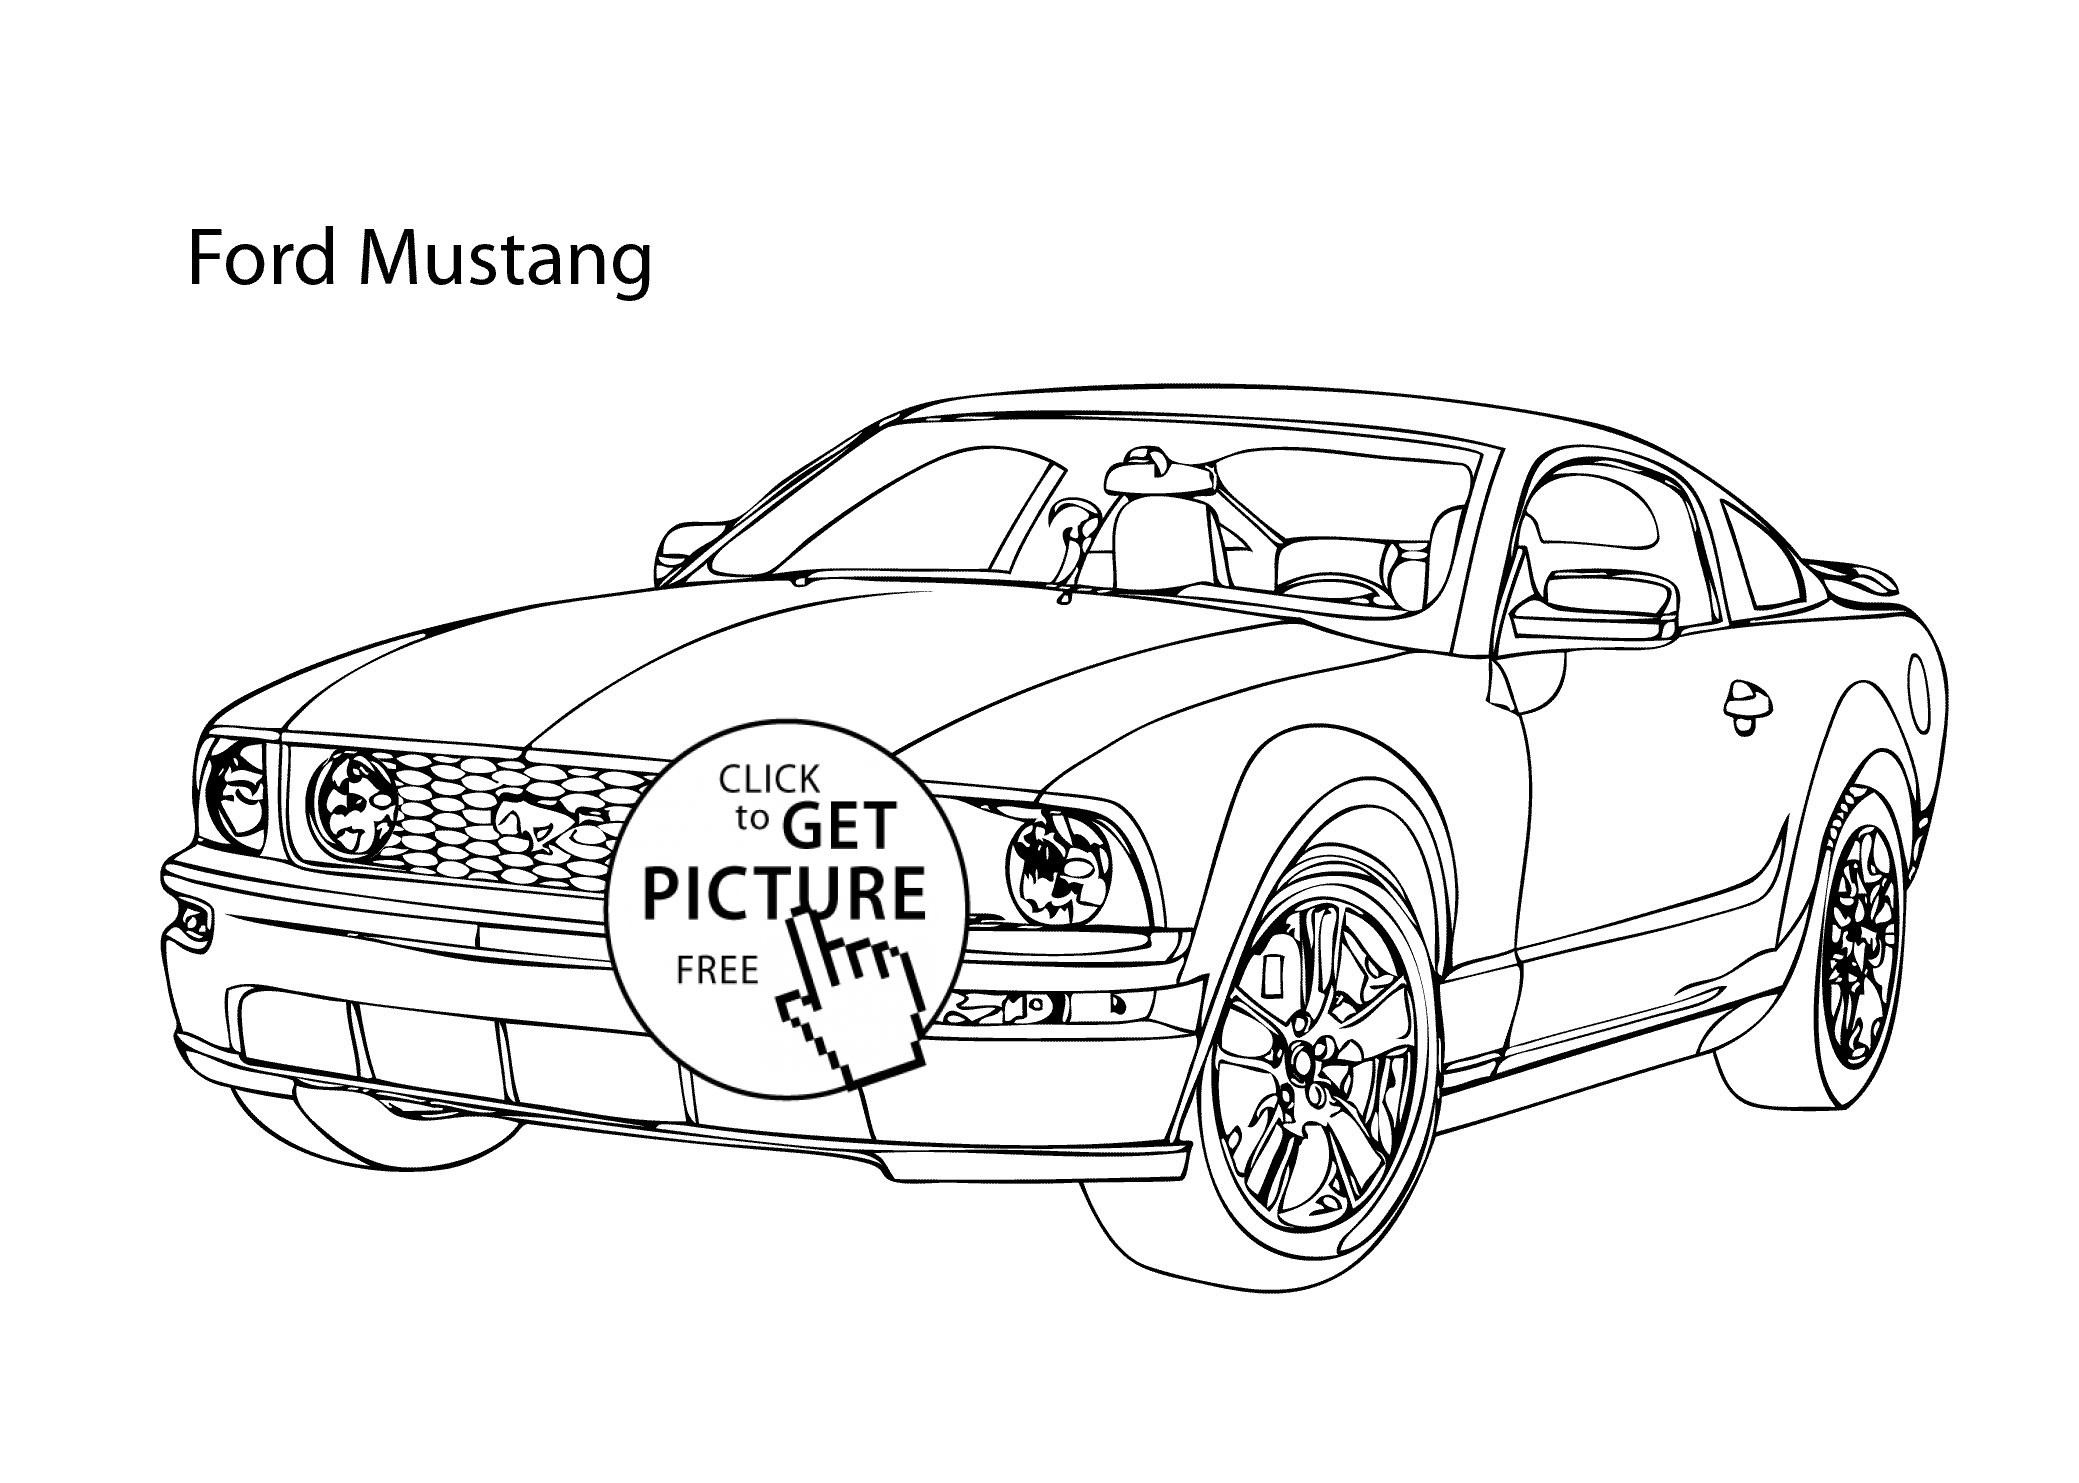 free mustang car coloring pages download png images cliparts on clipart library top model disegni da colorare e stampare fantasmi immagini per bambini